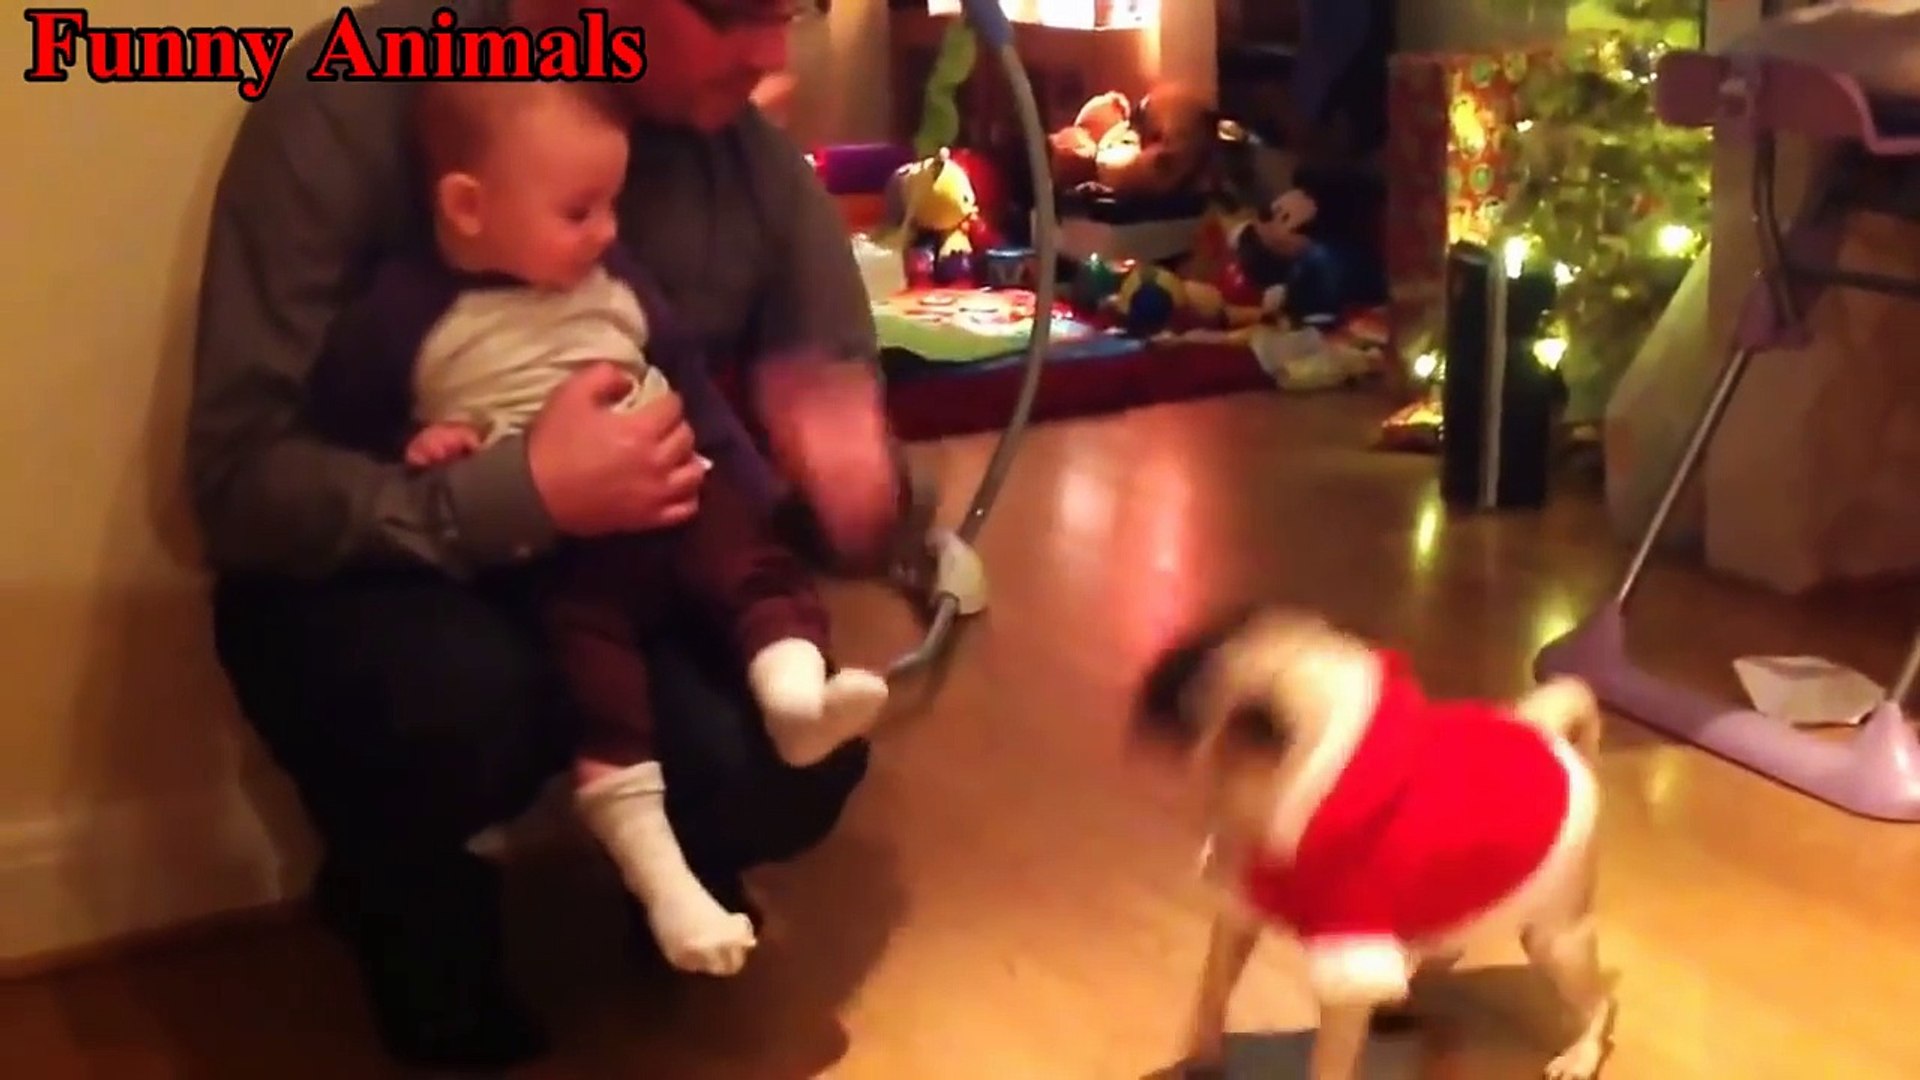 Cute Baby Laughing At Pug Dogs Will Make You Happy - Funny Dogs and Baby